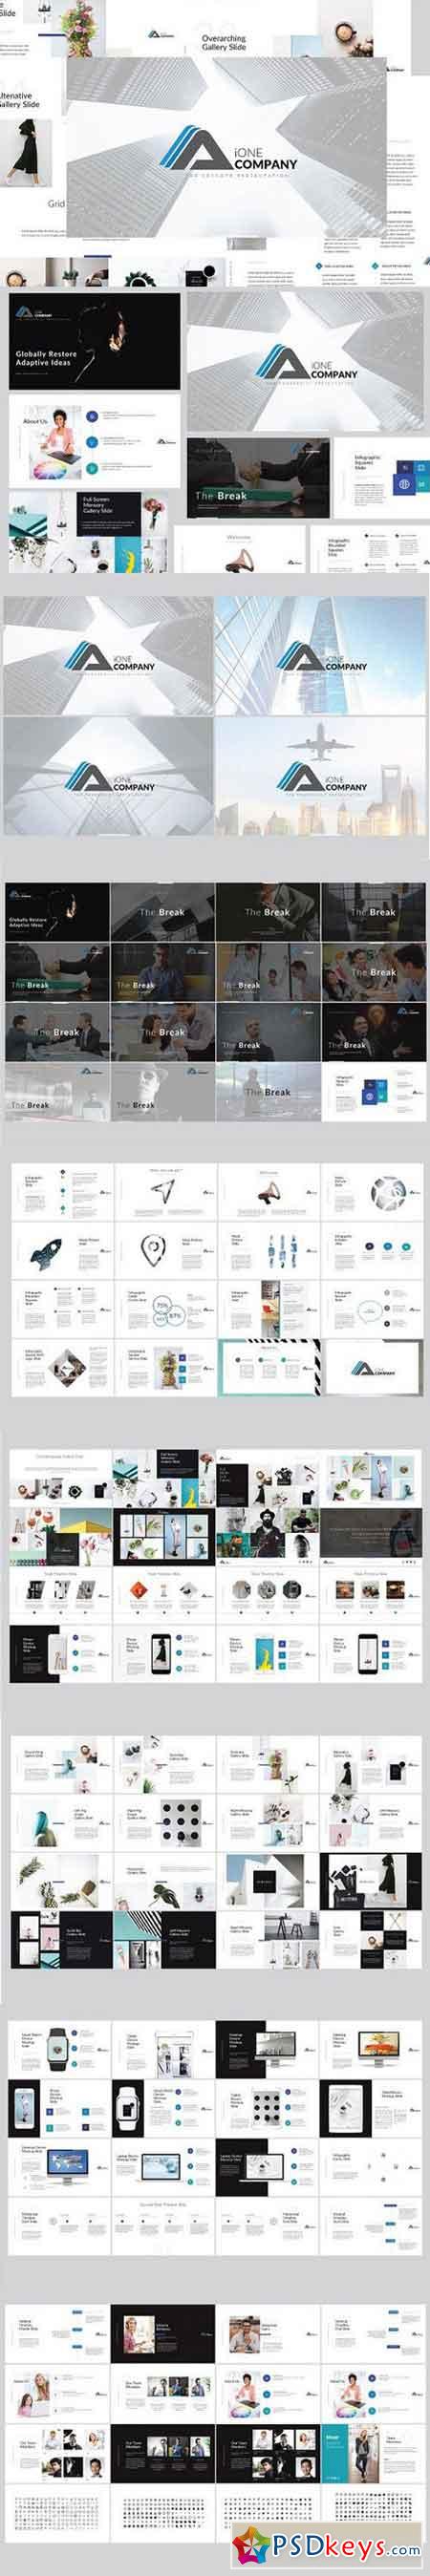 iOne Business Keynote Template 1237523